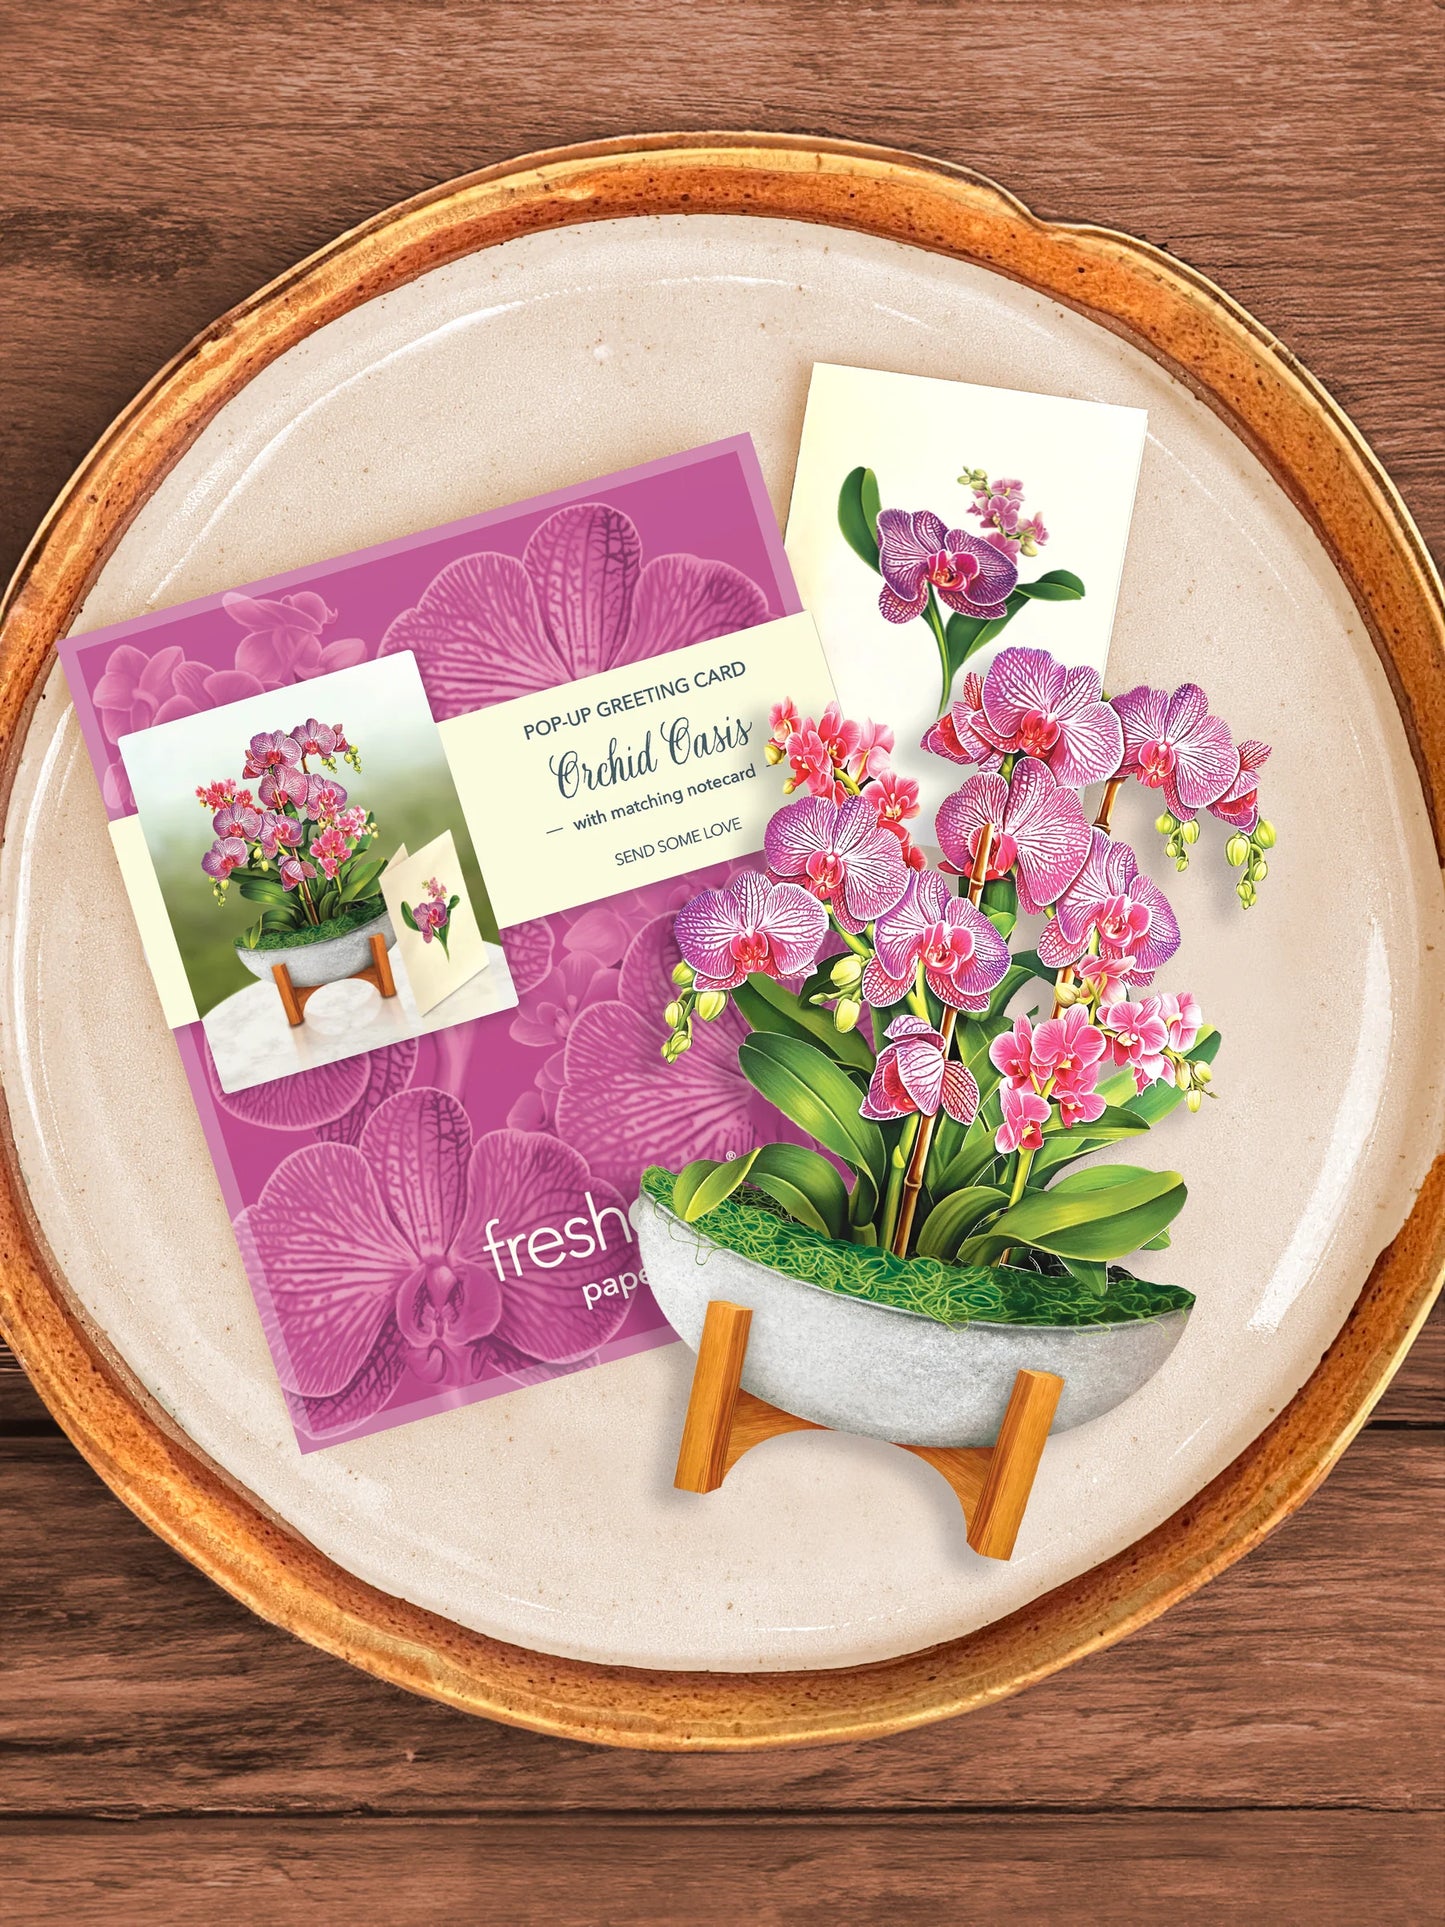 Orchid Oasis bouquet, enclosure card, and mailing envelope arranged on a tray.